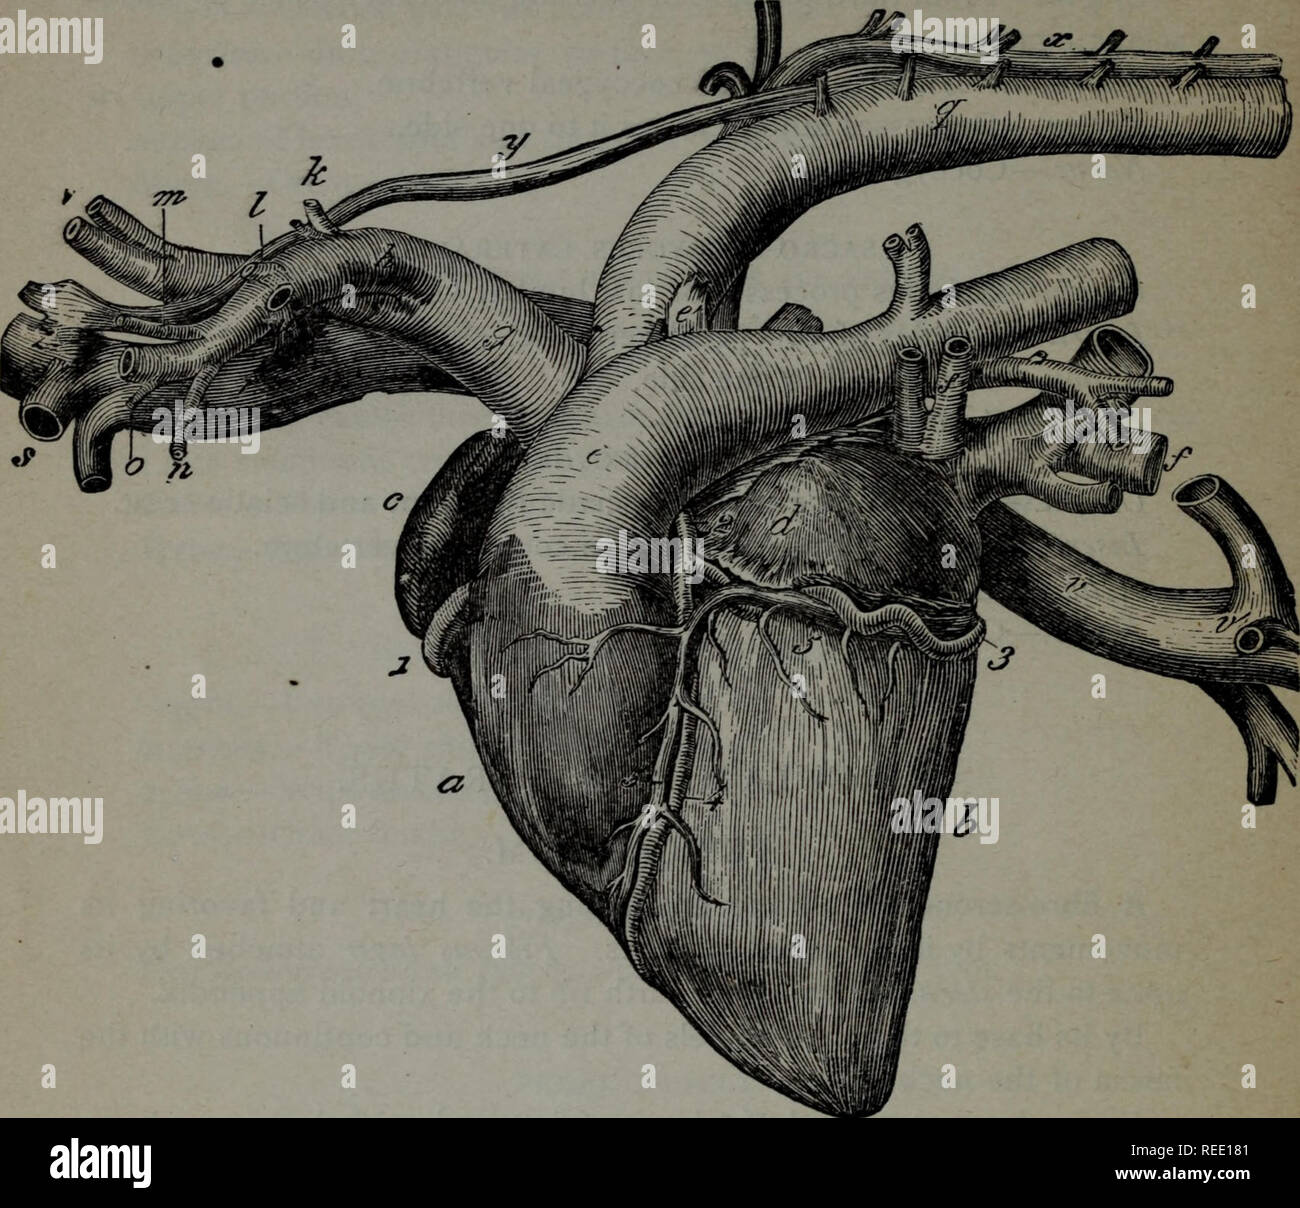 . A compend of equine anatomy and physiology. Horses. 82 EQUINE ANATOMY. Fig.. THE HEART AND PRINCIPAL VESSELS; LEFT FACE. Right ventricle; b, Left ventricle; c, Right auricle; d, Left auricle; e, Pulmonary artery ; e'', Obliterated arterial canal; f, Pulmonary veins ; g, Anterior aorta; h, Left axillary artery ; z&quot;, Right axillary artery, or brachio-cephalic trunk; j, Origin of the dorsal artery; k, Origin of the superior cervical artery; /, Origin of the vertebral artery; in, Origin of the inferior cervical artery; n, Origin of the internal thoracic artery; o, Origin of the external dit Stock Photo